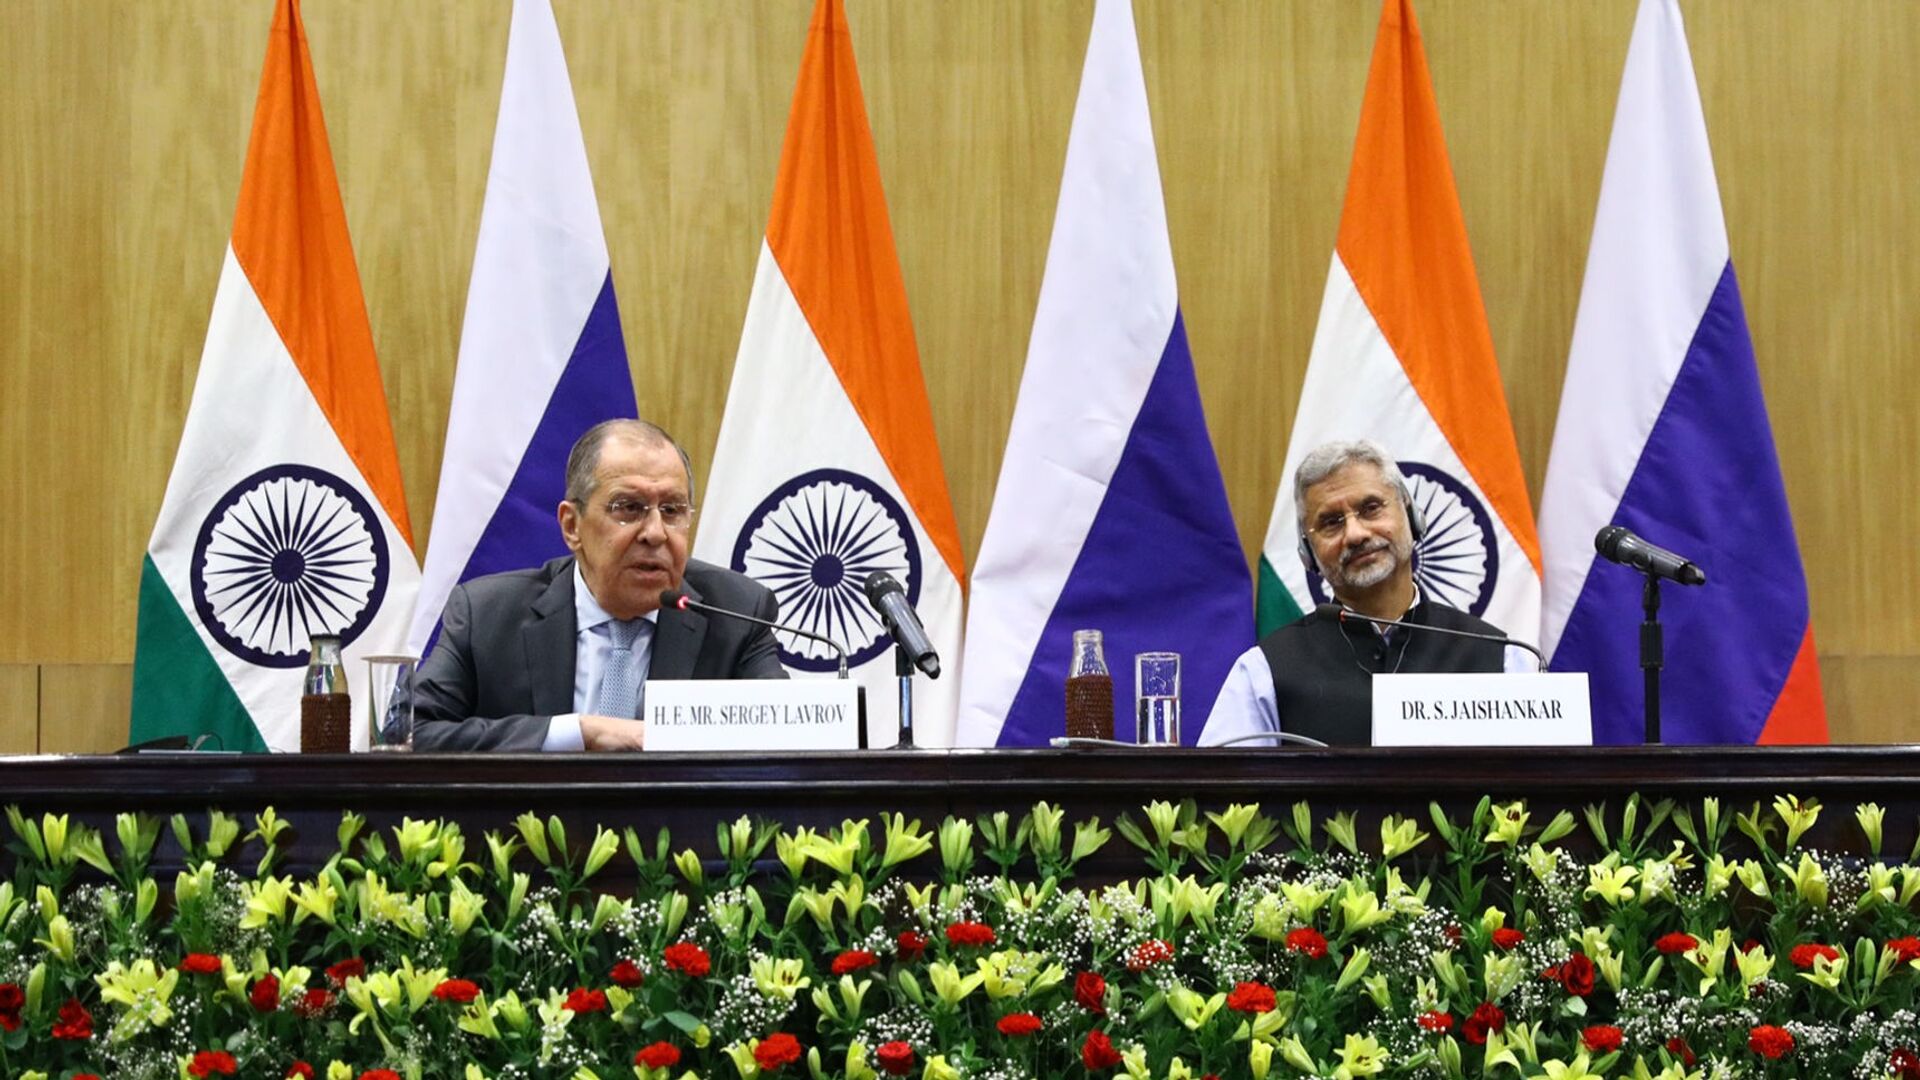  Russian Foreign Minister Sergei Lavrov, left, and his Indian counterpart Subrahmanyam Jaishankar attend a joint news conference following their meeting, in New Delhi, India - Sputnik International, 1920, 06.04.2021